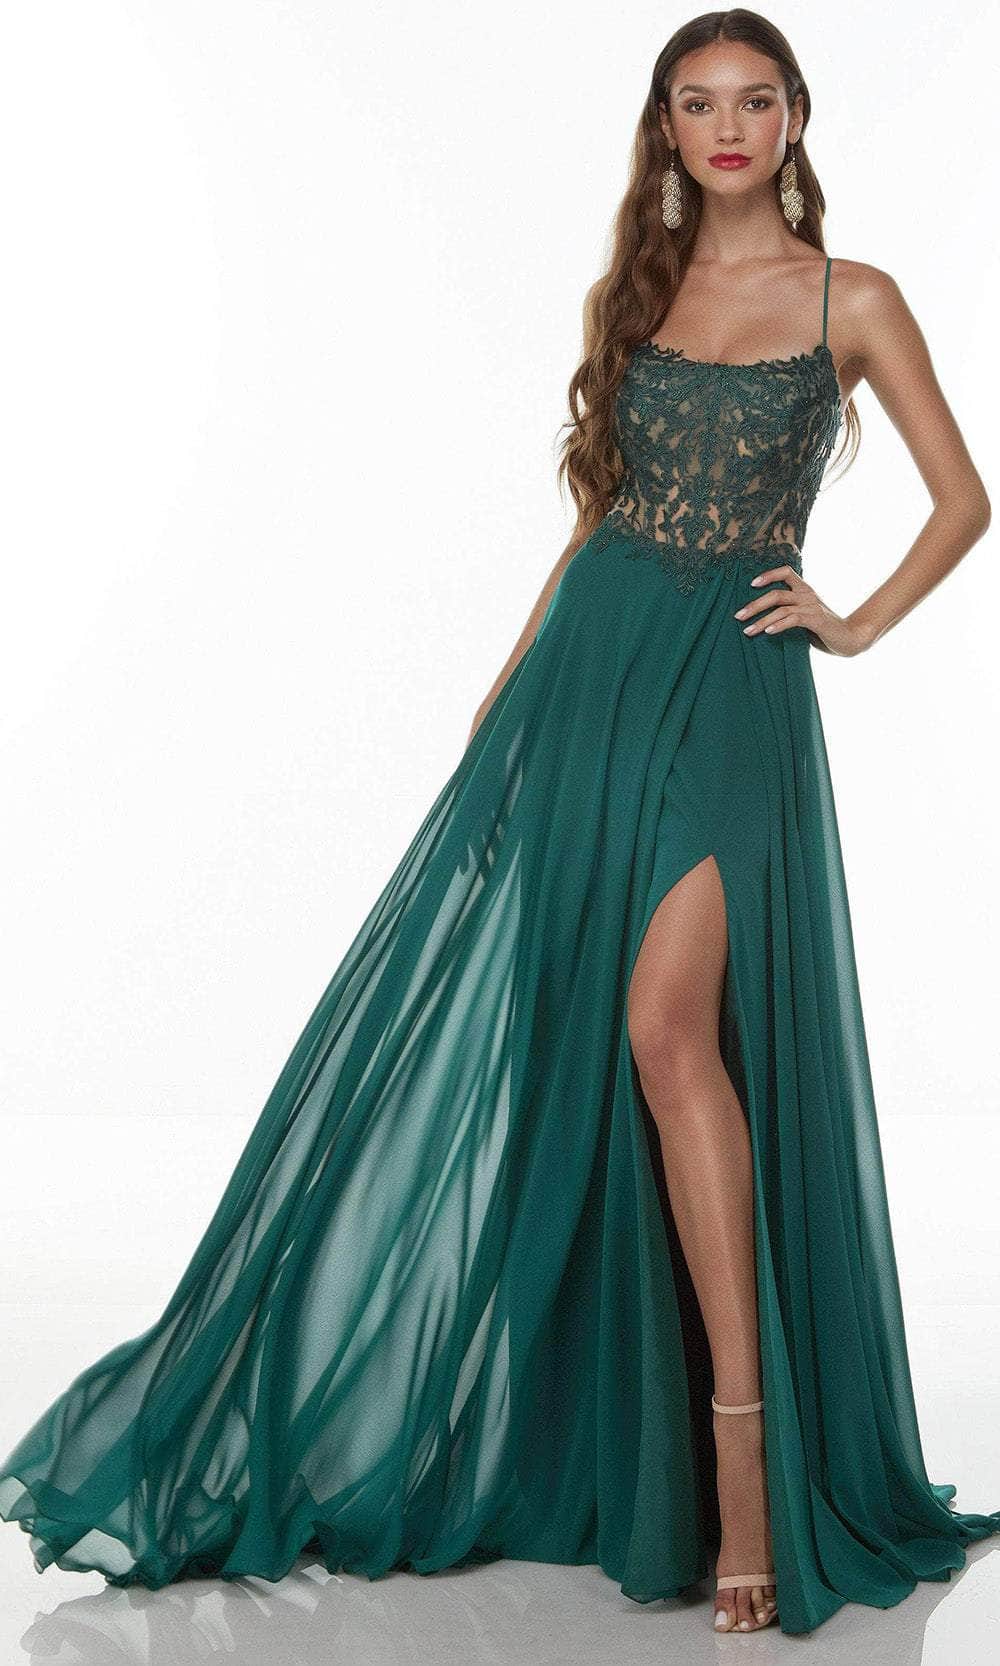 Alyce Paris 61198 - Scoop Neck High Slit Prom Gown Special Occasion Dress 000 / Pine